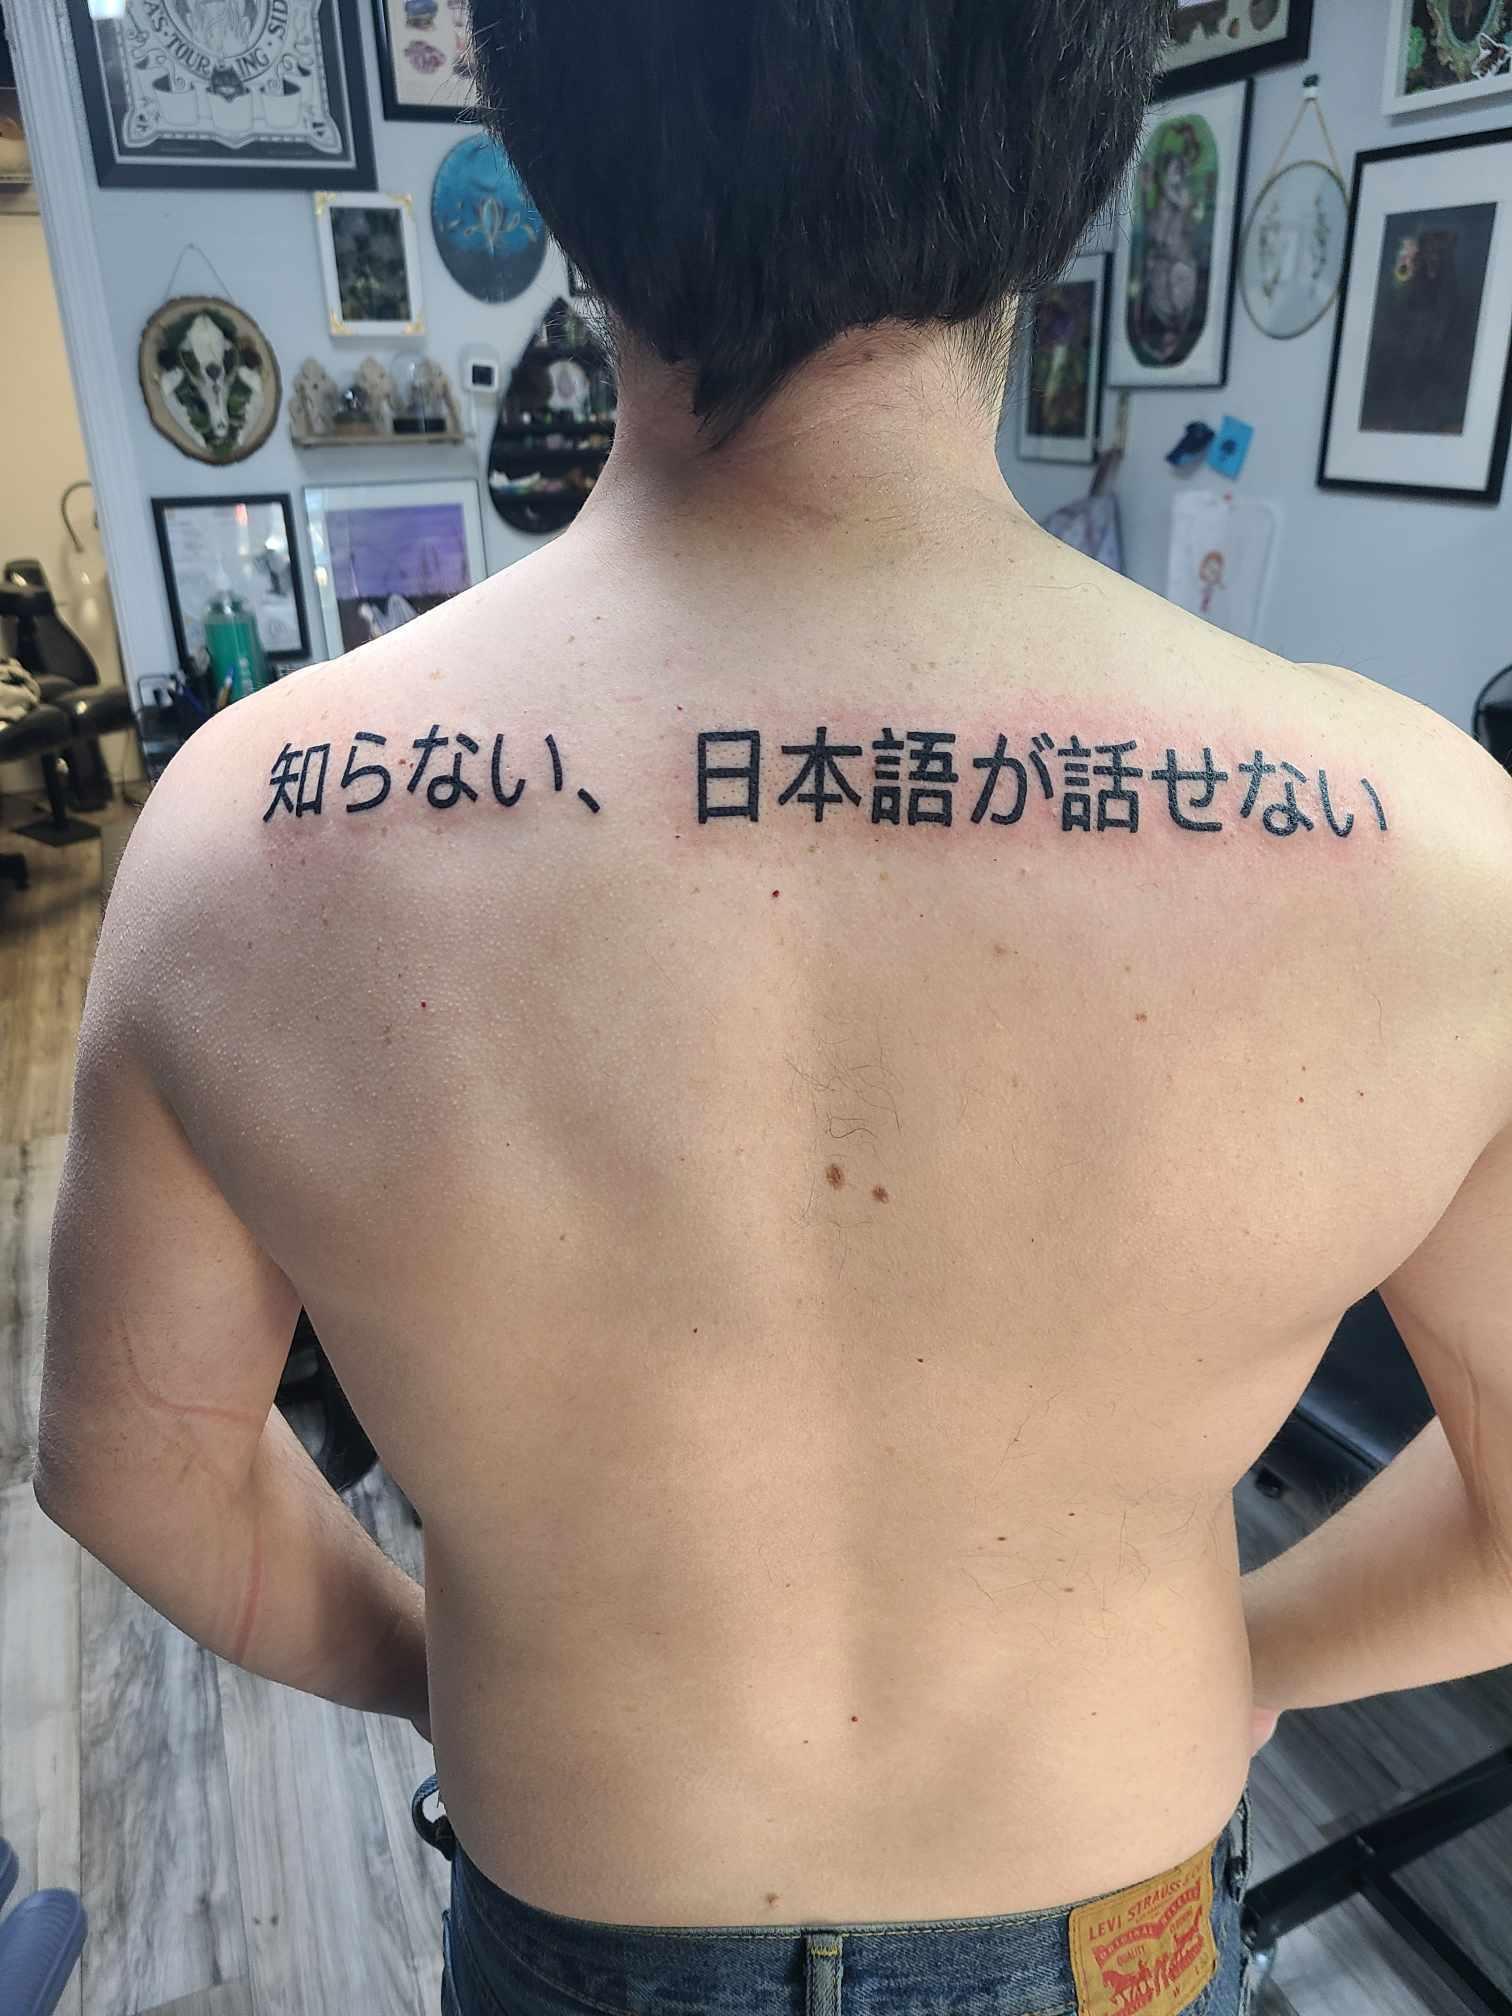 r/madlads - My new tattoo says: I don't know, I can't speak Japanese